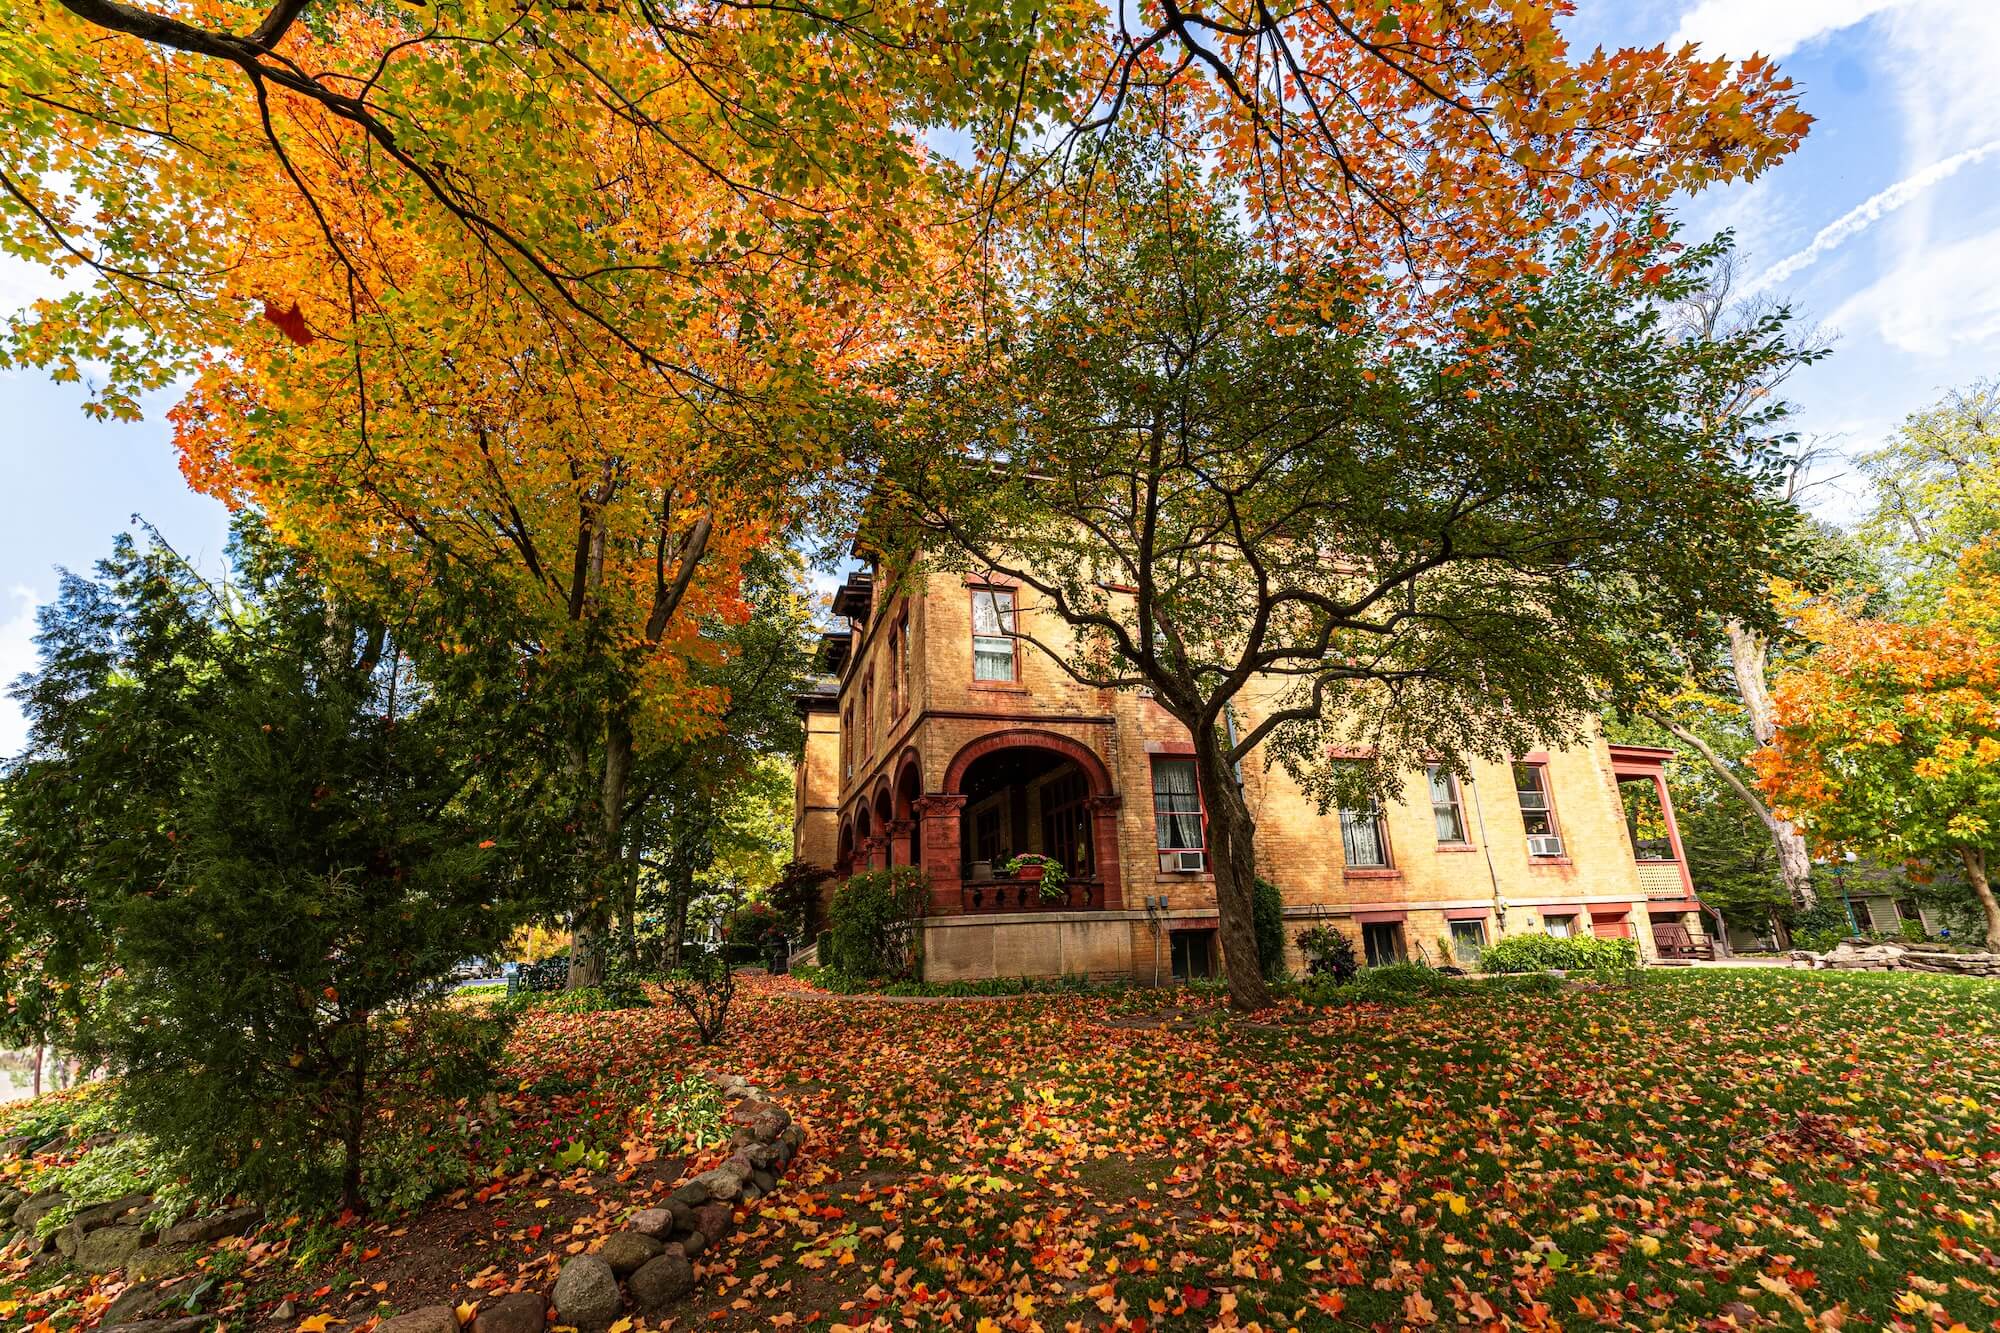 Back of the Mansion in the Fall